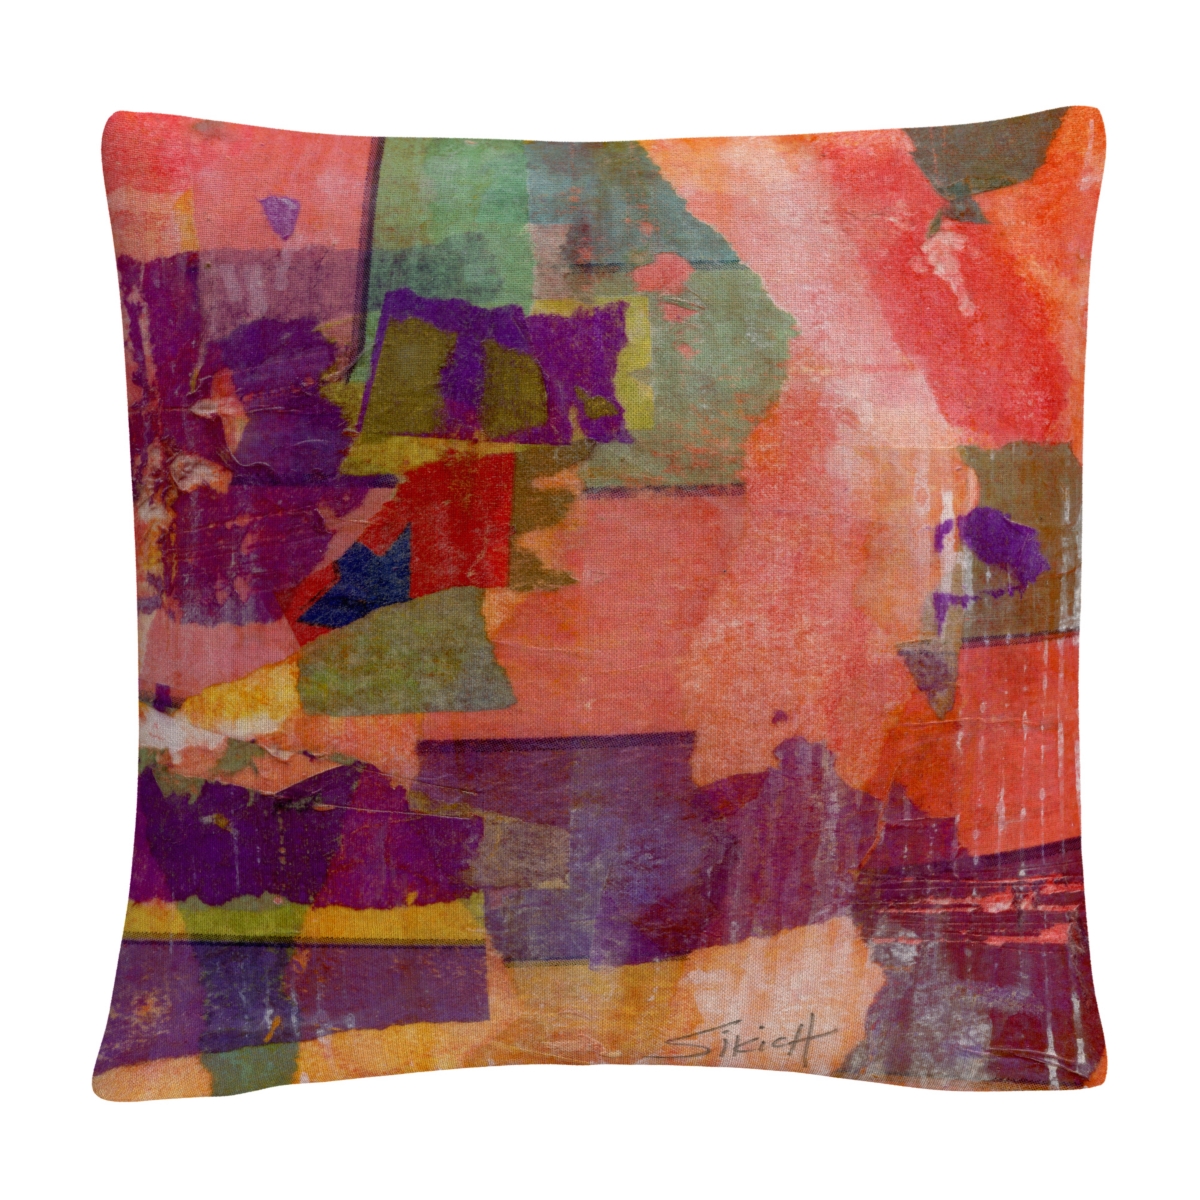 Anthony Sikich Wanderings Colorful Shapes Composition Decorative Pillow, 16 x 16